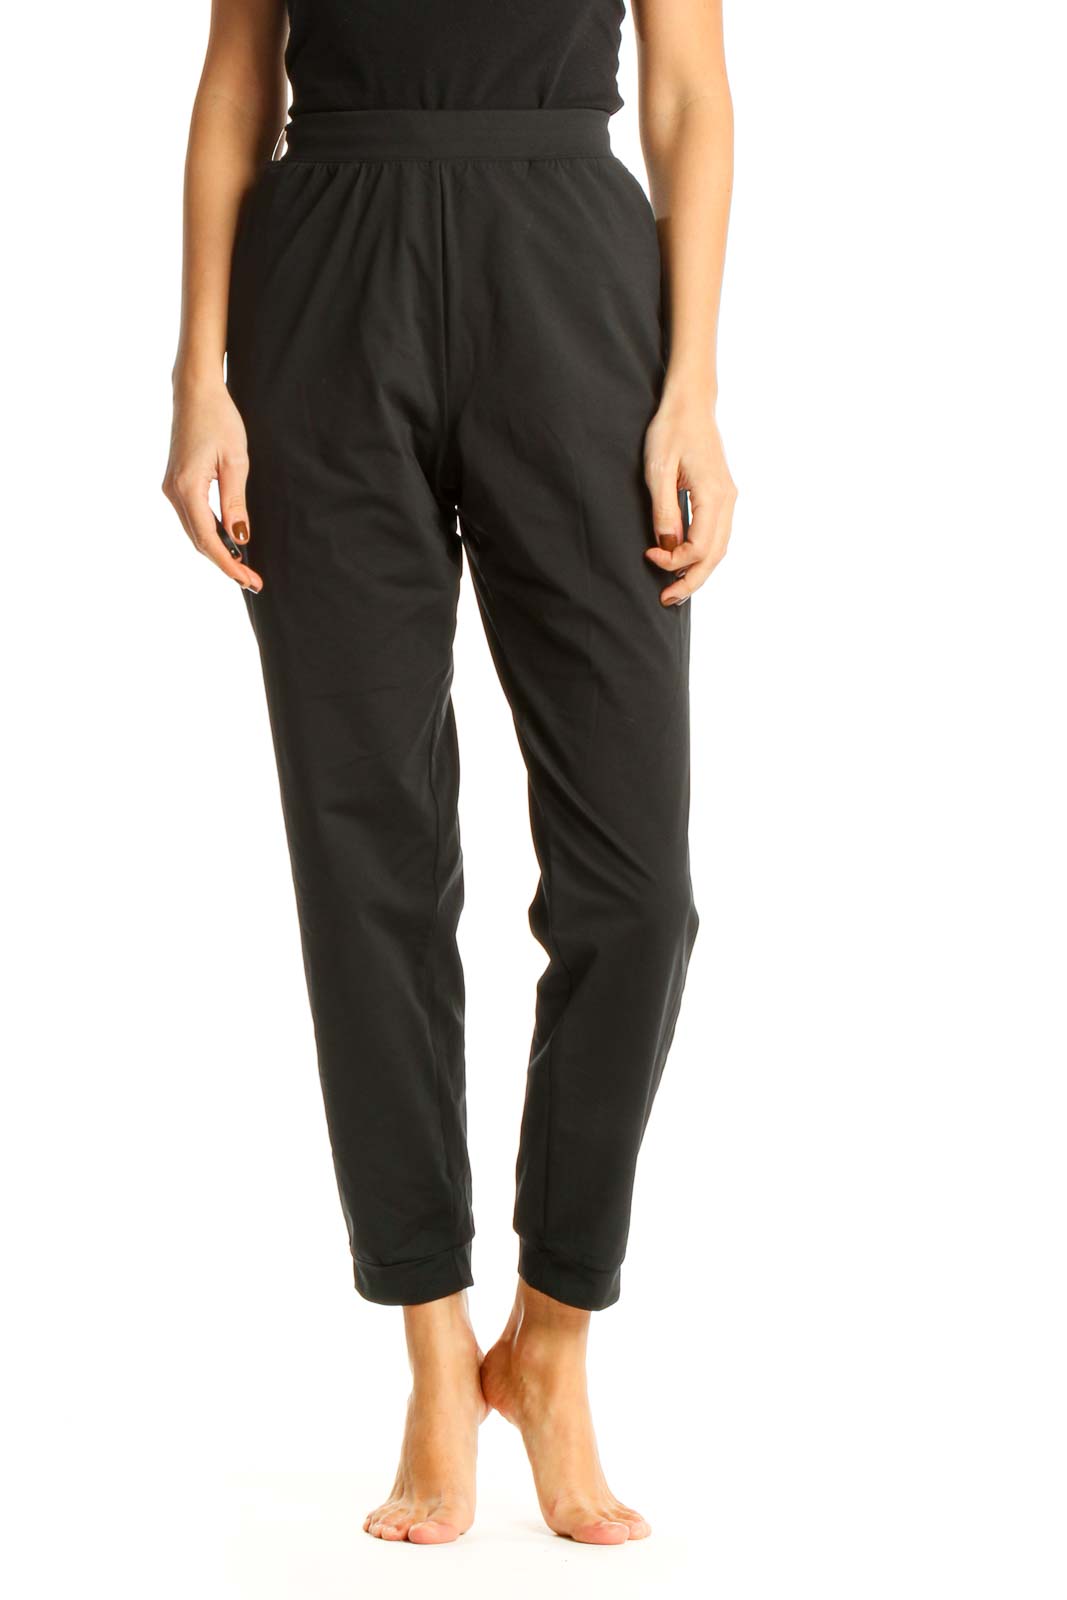 Black Textured Casual Sweatpants Front